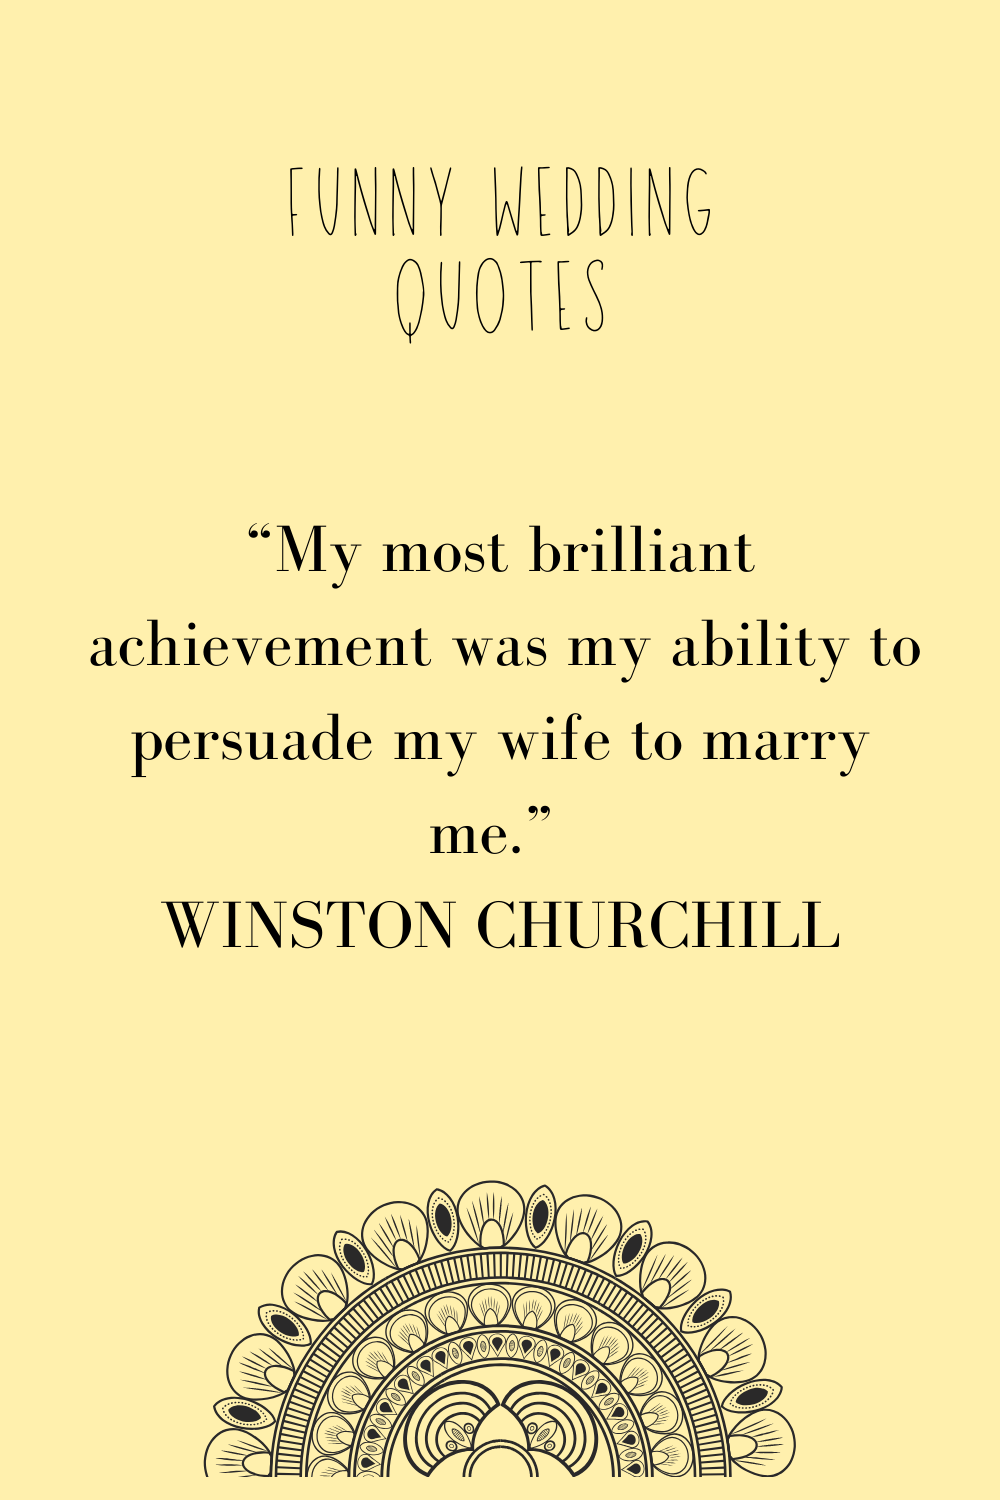 52 Funny Wedding quotes about marriage ~ KISS THE BRIDE MAGAZINE